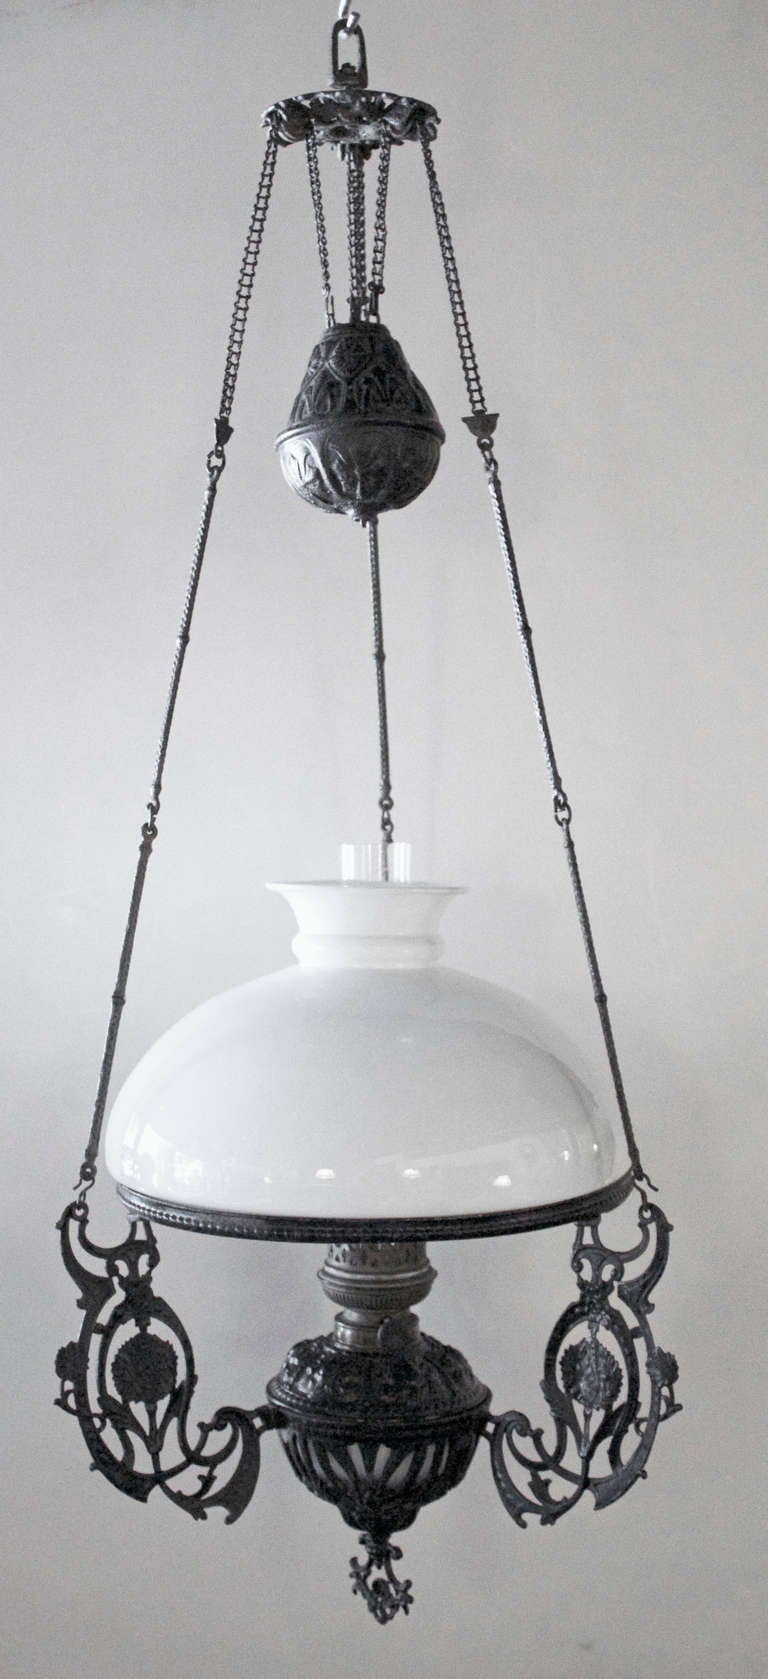 Charming hanging oil Lamp with a black lacquered bronze frame surmounted by a white opaline glass shade..The oil reservoir is also made of a white opale glass inserted in a black bronze structure..
The wick is surrounded by a cylindrical crystal